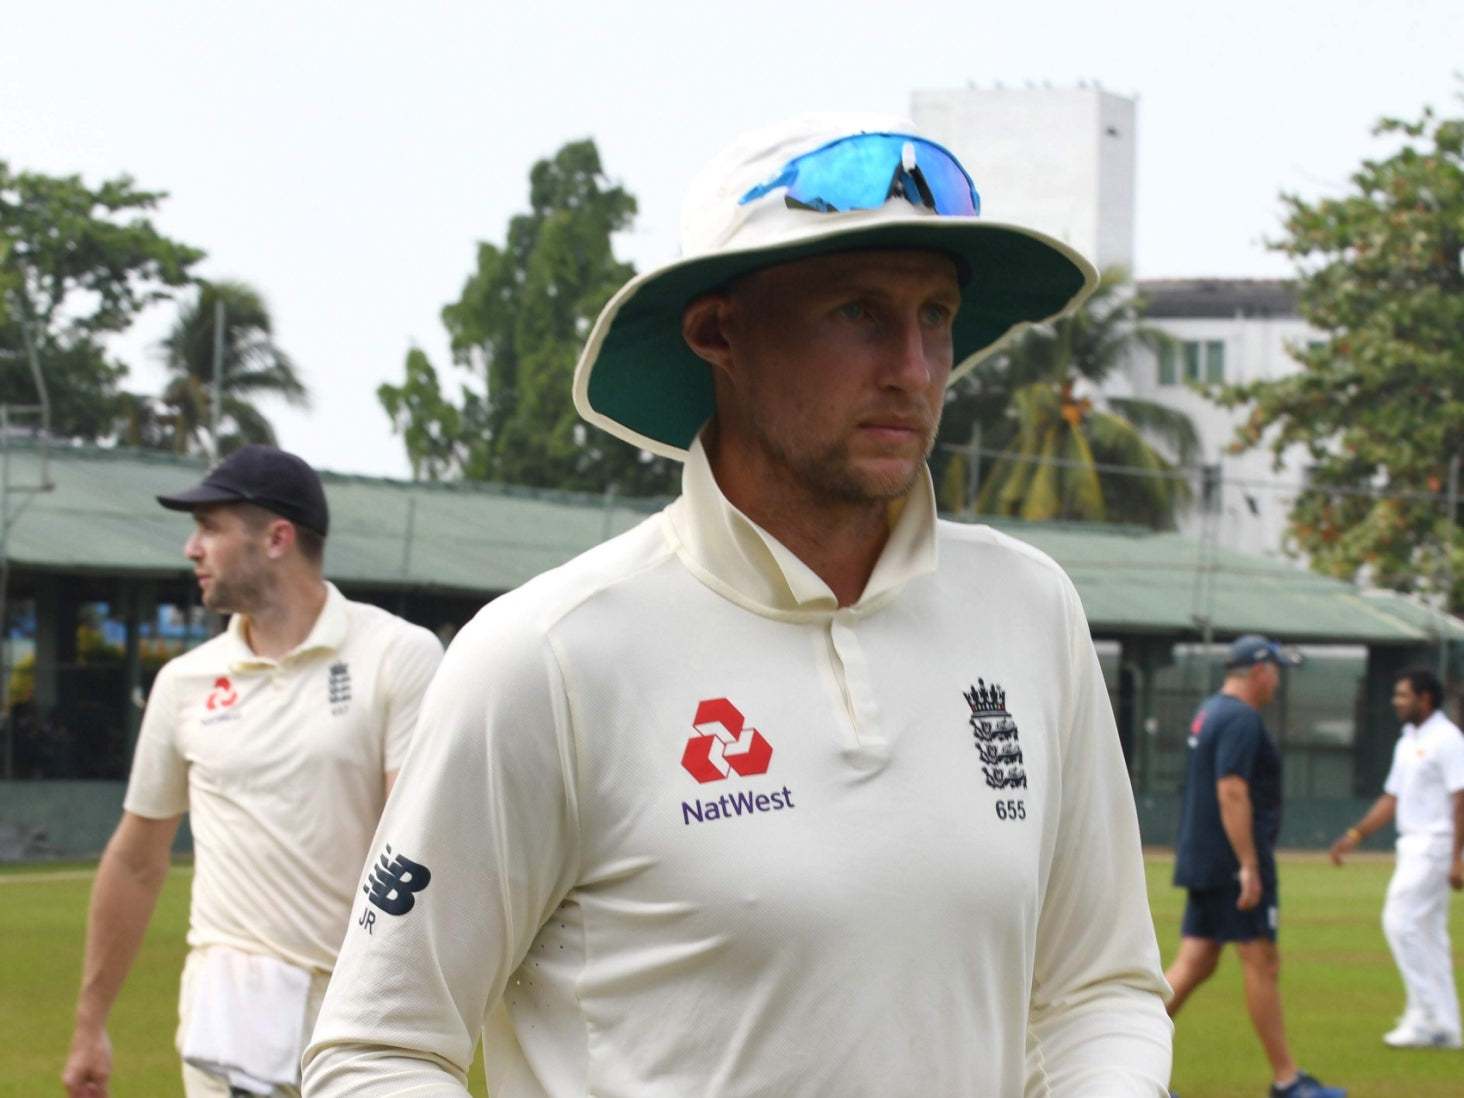 Joe Root and England could face a second straight Test series cancellation